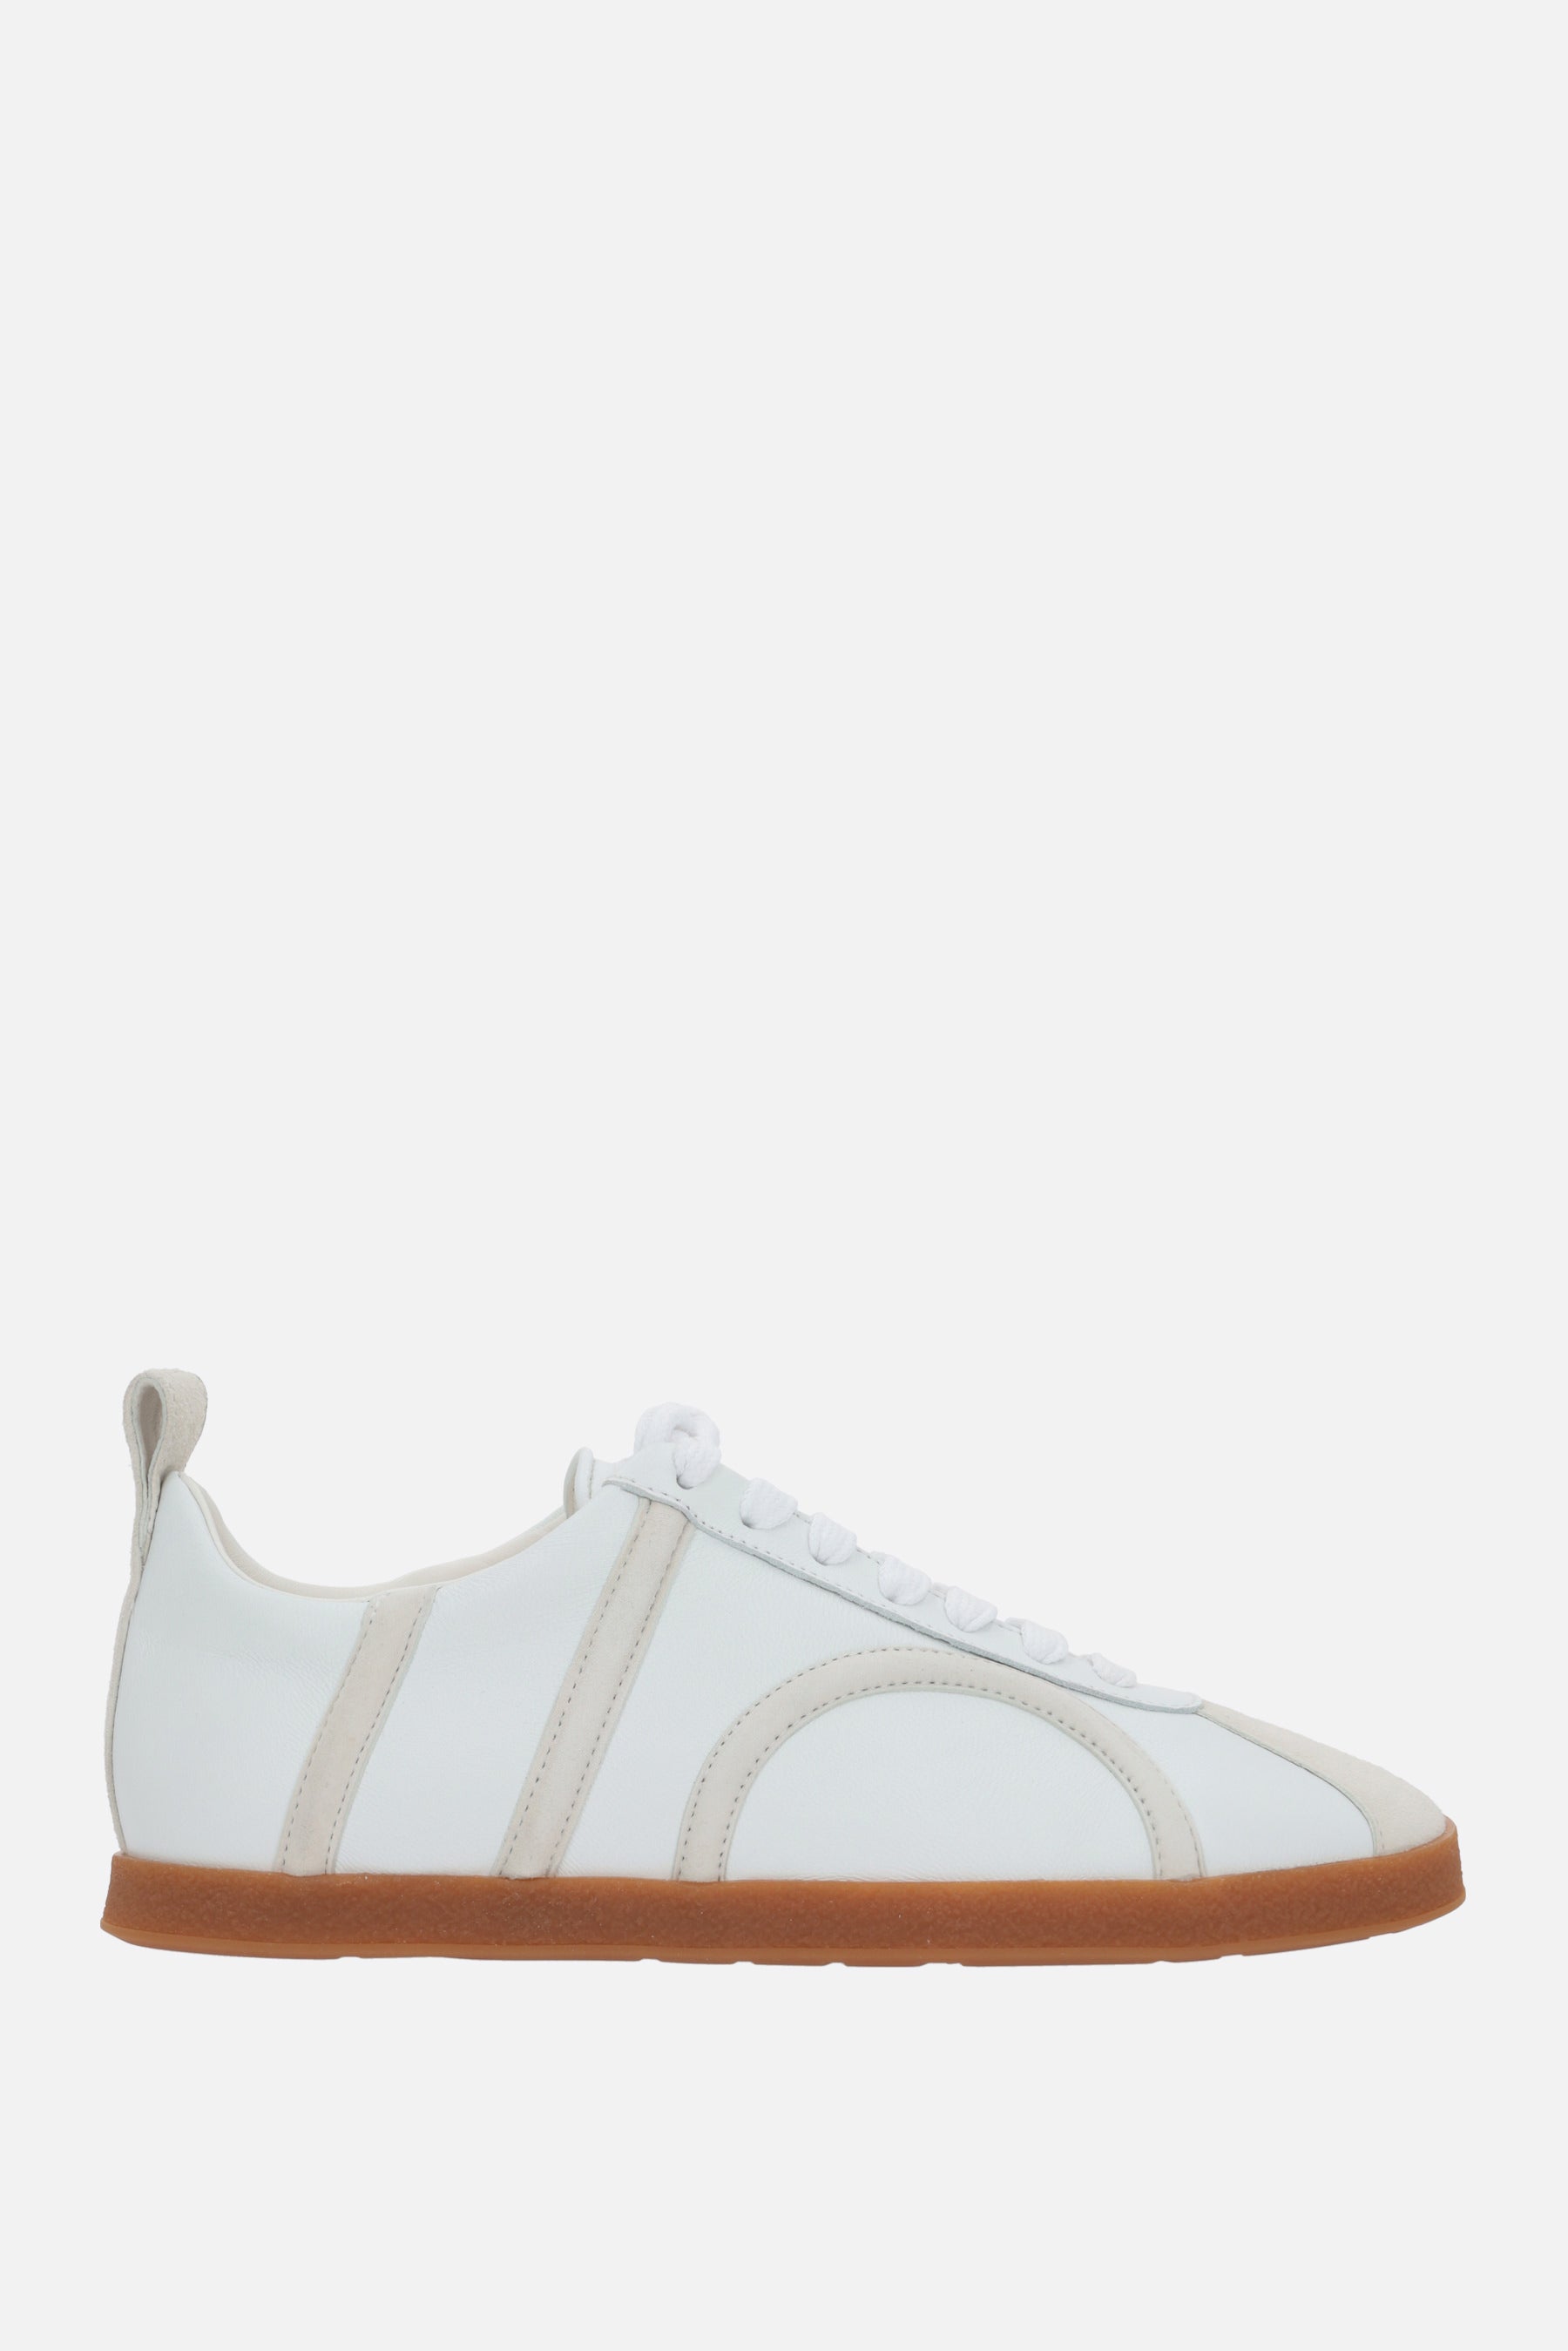 The Leather nappa sneakers